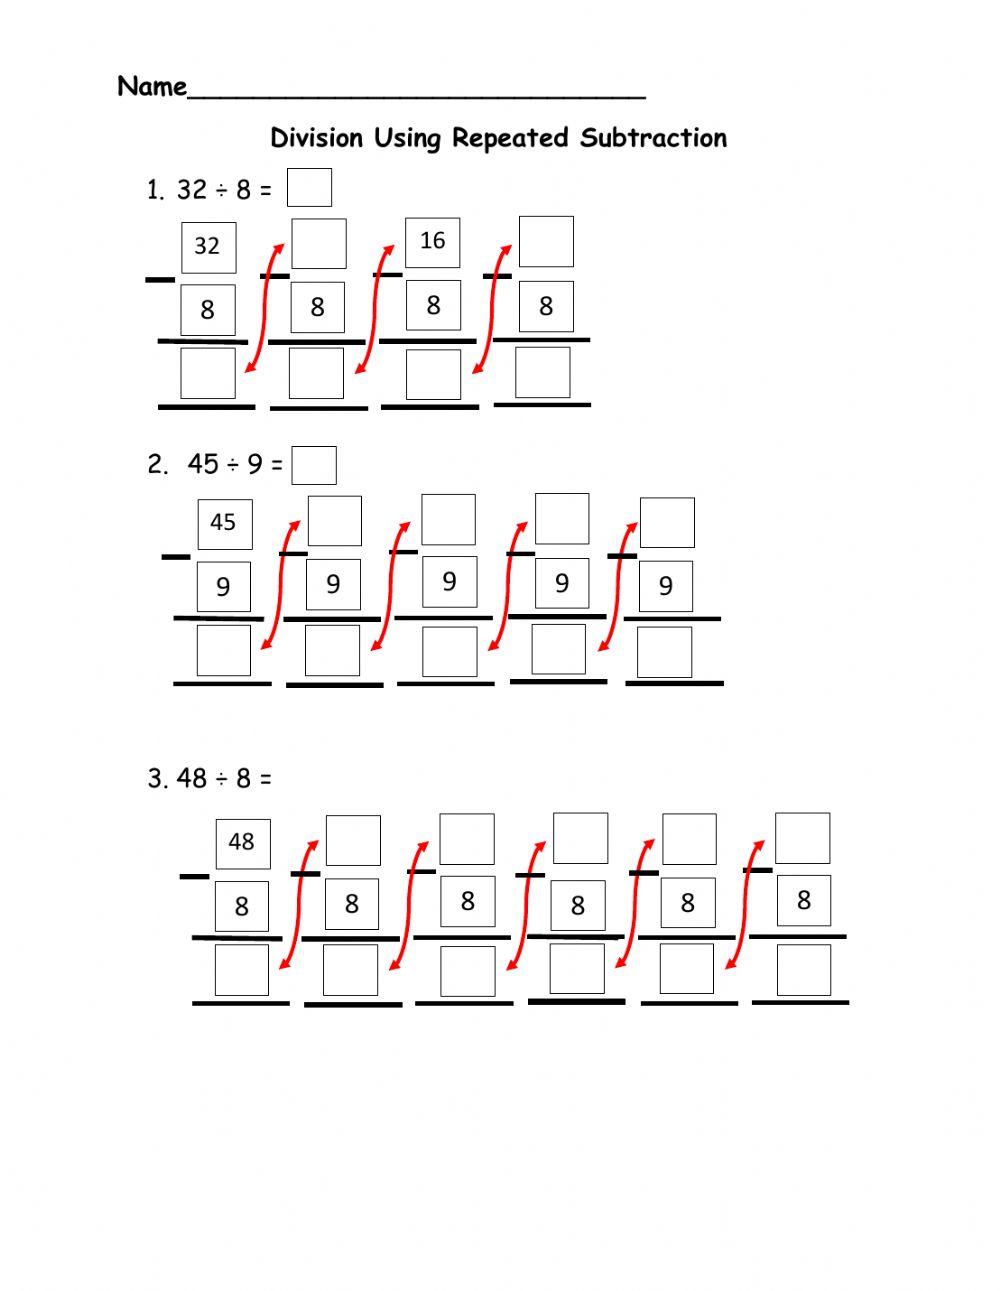 Division using repeated subtraction